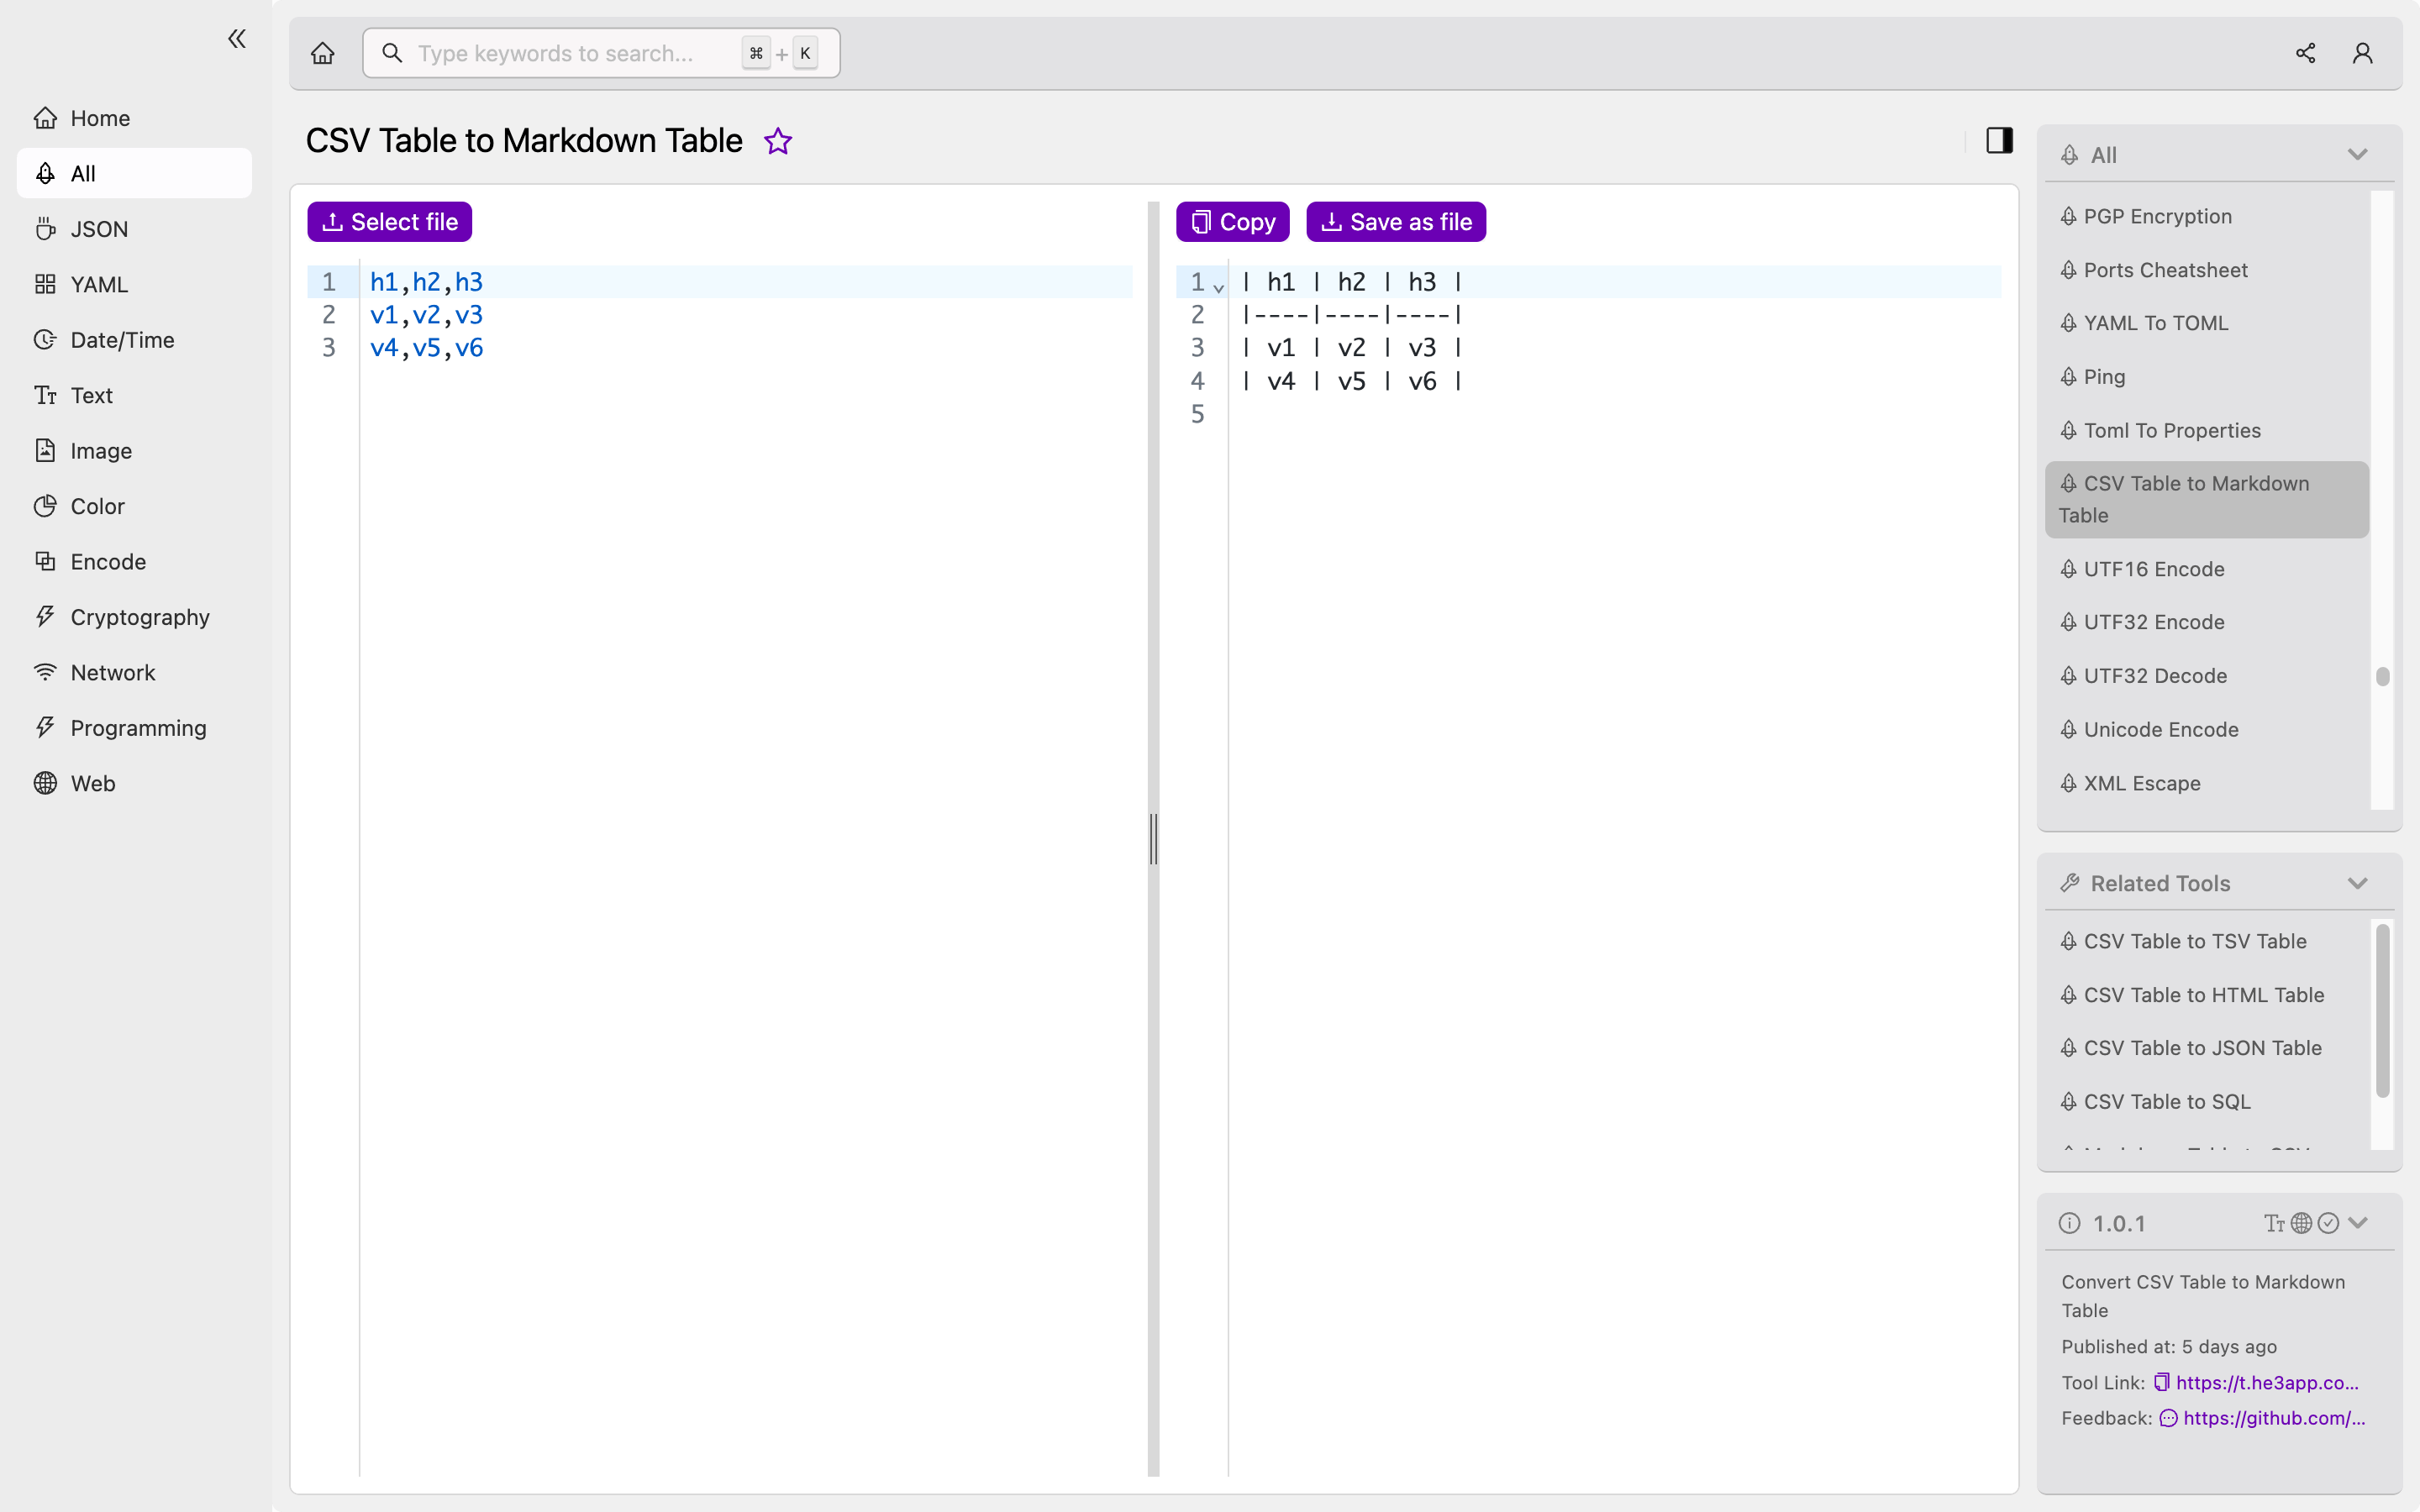 CSV Table to Markdown Table